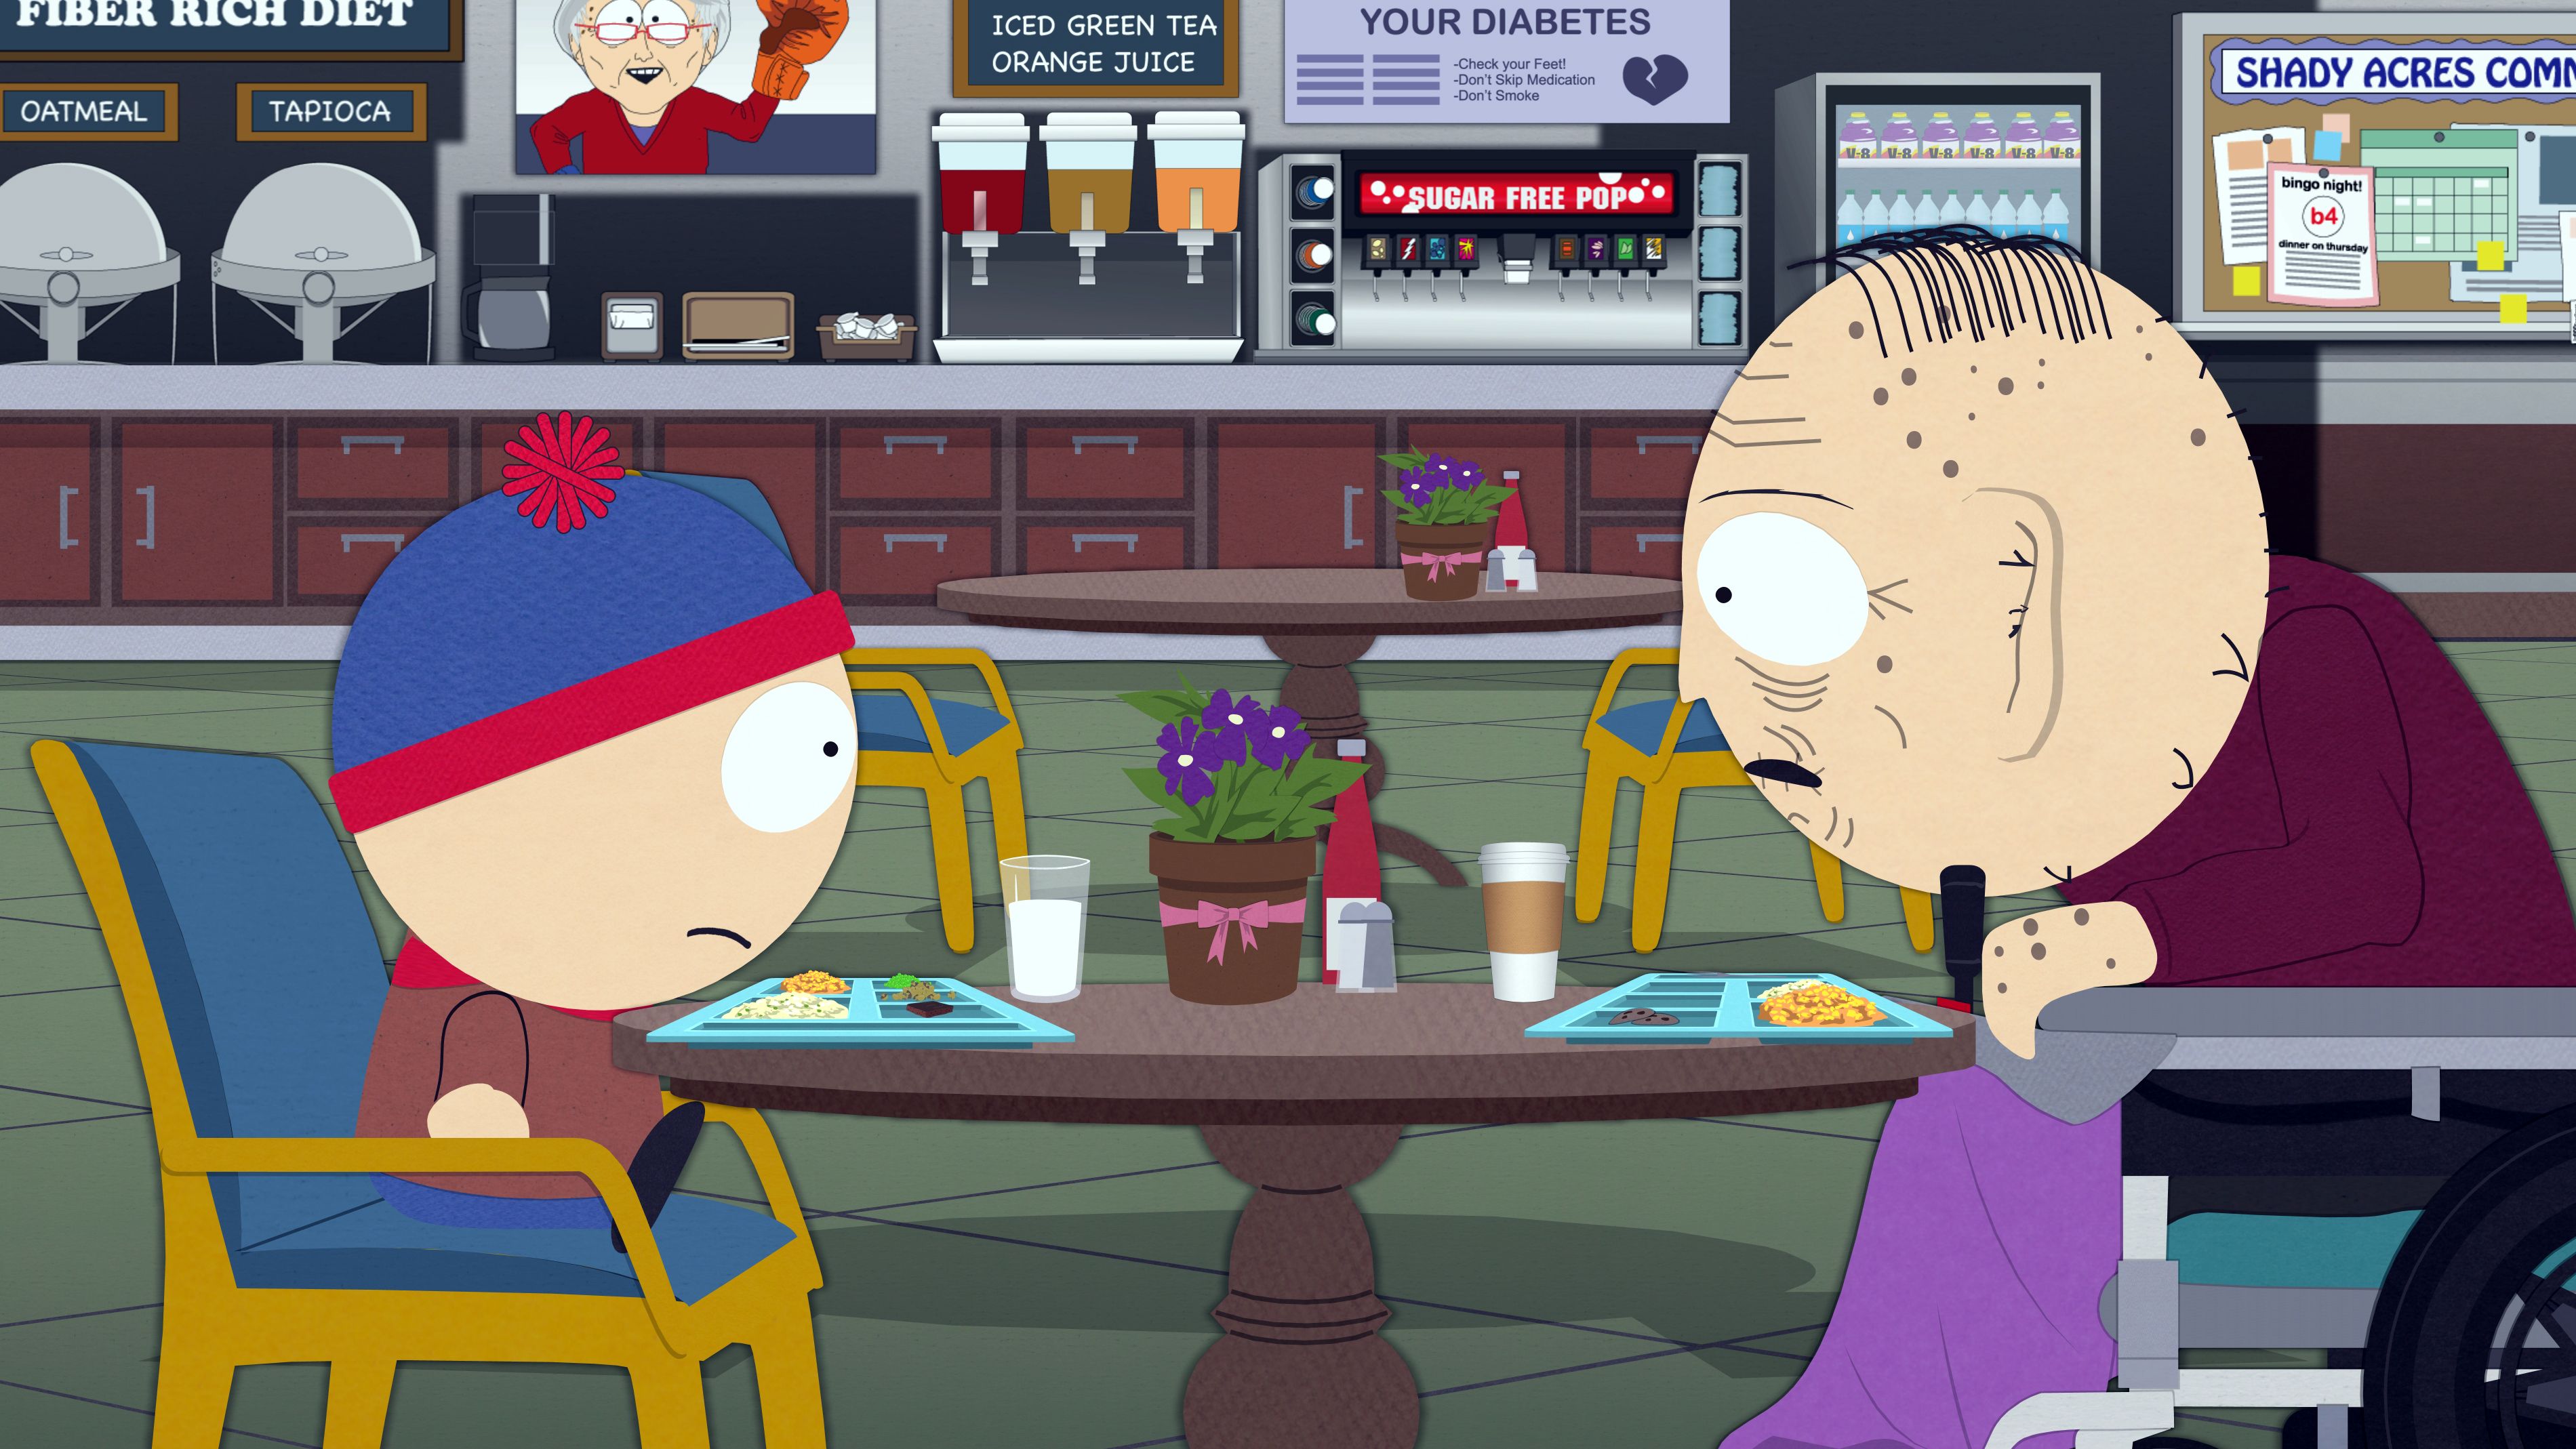 southpark october 18 image2 1 Recapping South Park: Theres More to Laughs Than Hummels & Heroin